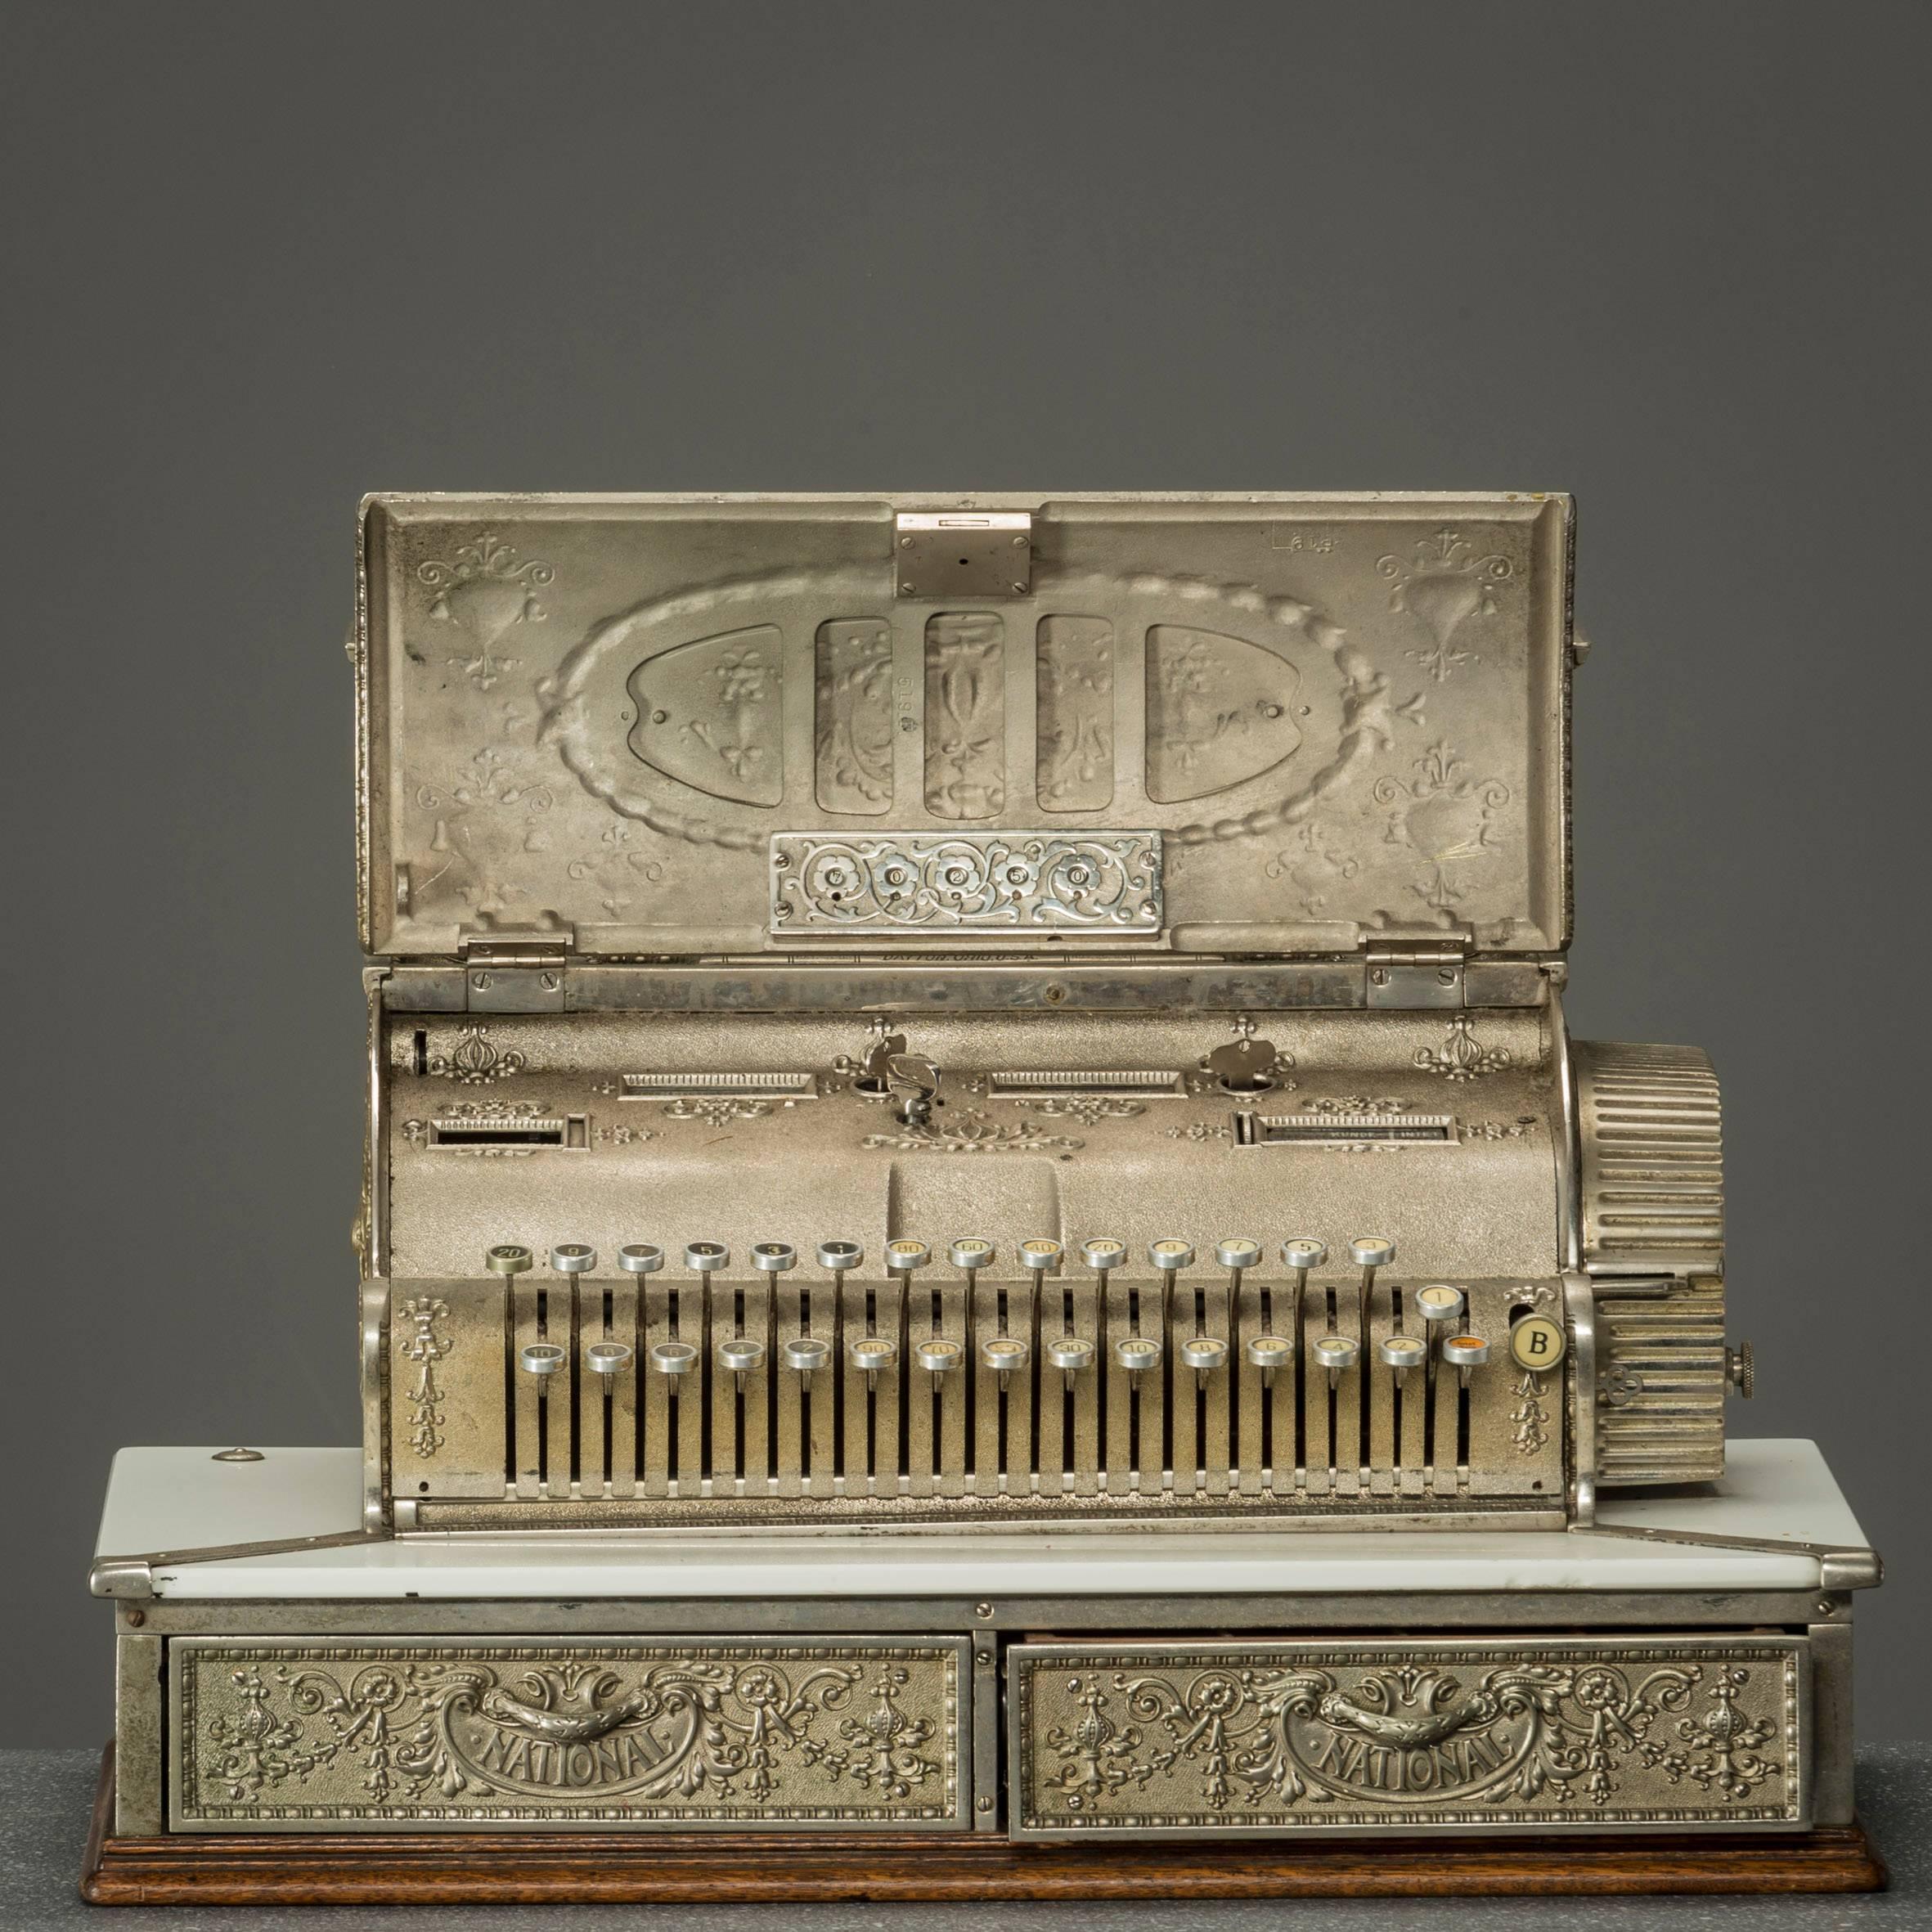 Cash register in nickel-plated chased brass with white marble edge. “National”, Dayton Ohio, USA, 1880-1910.
A very decorative object.

It works, but 100% functionality is not guaranteed